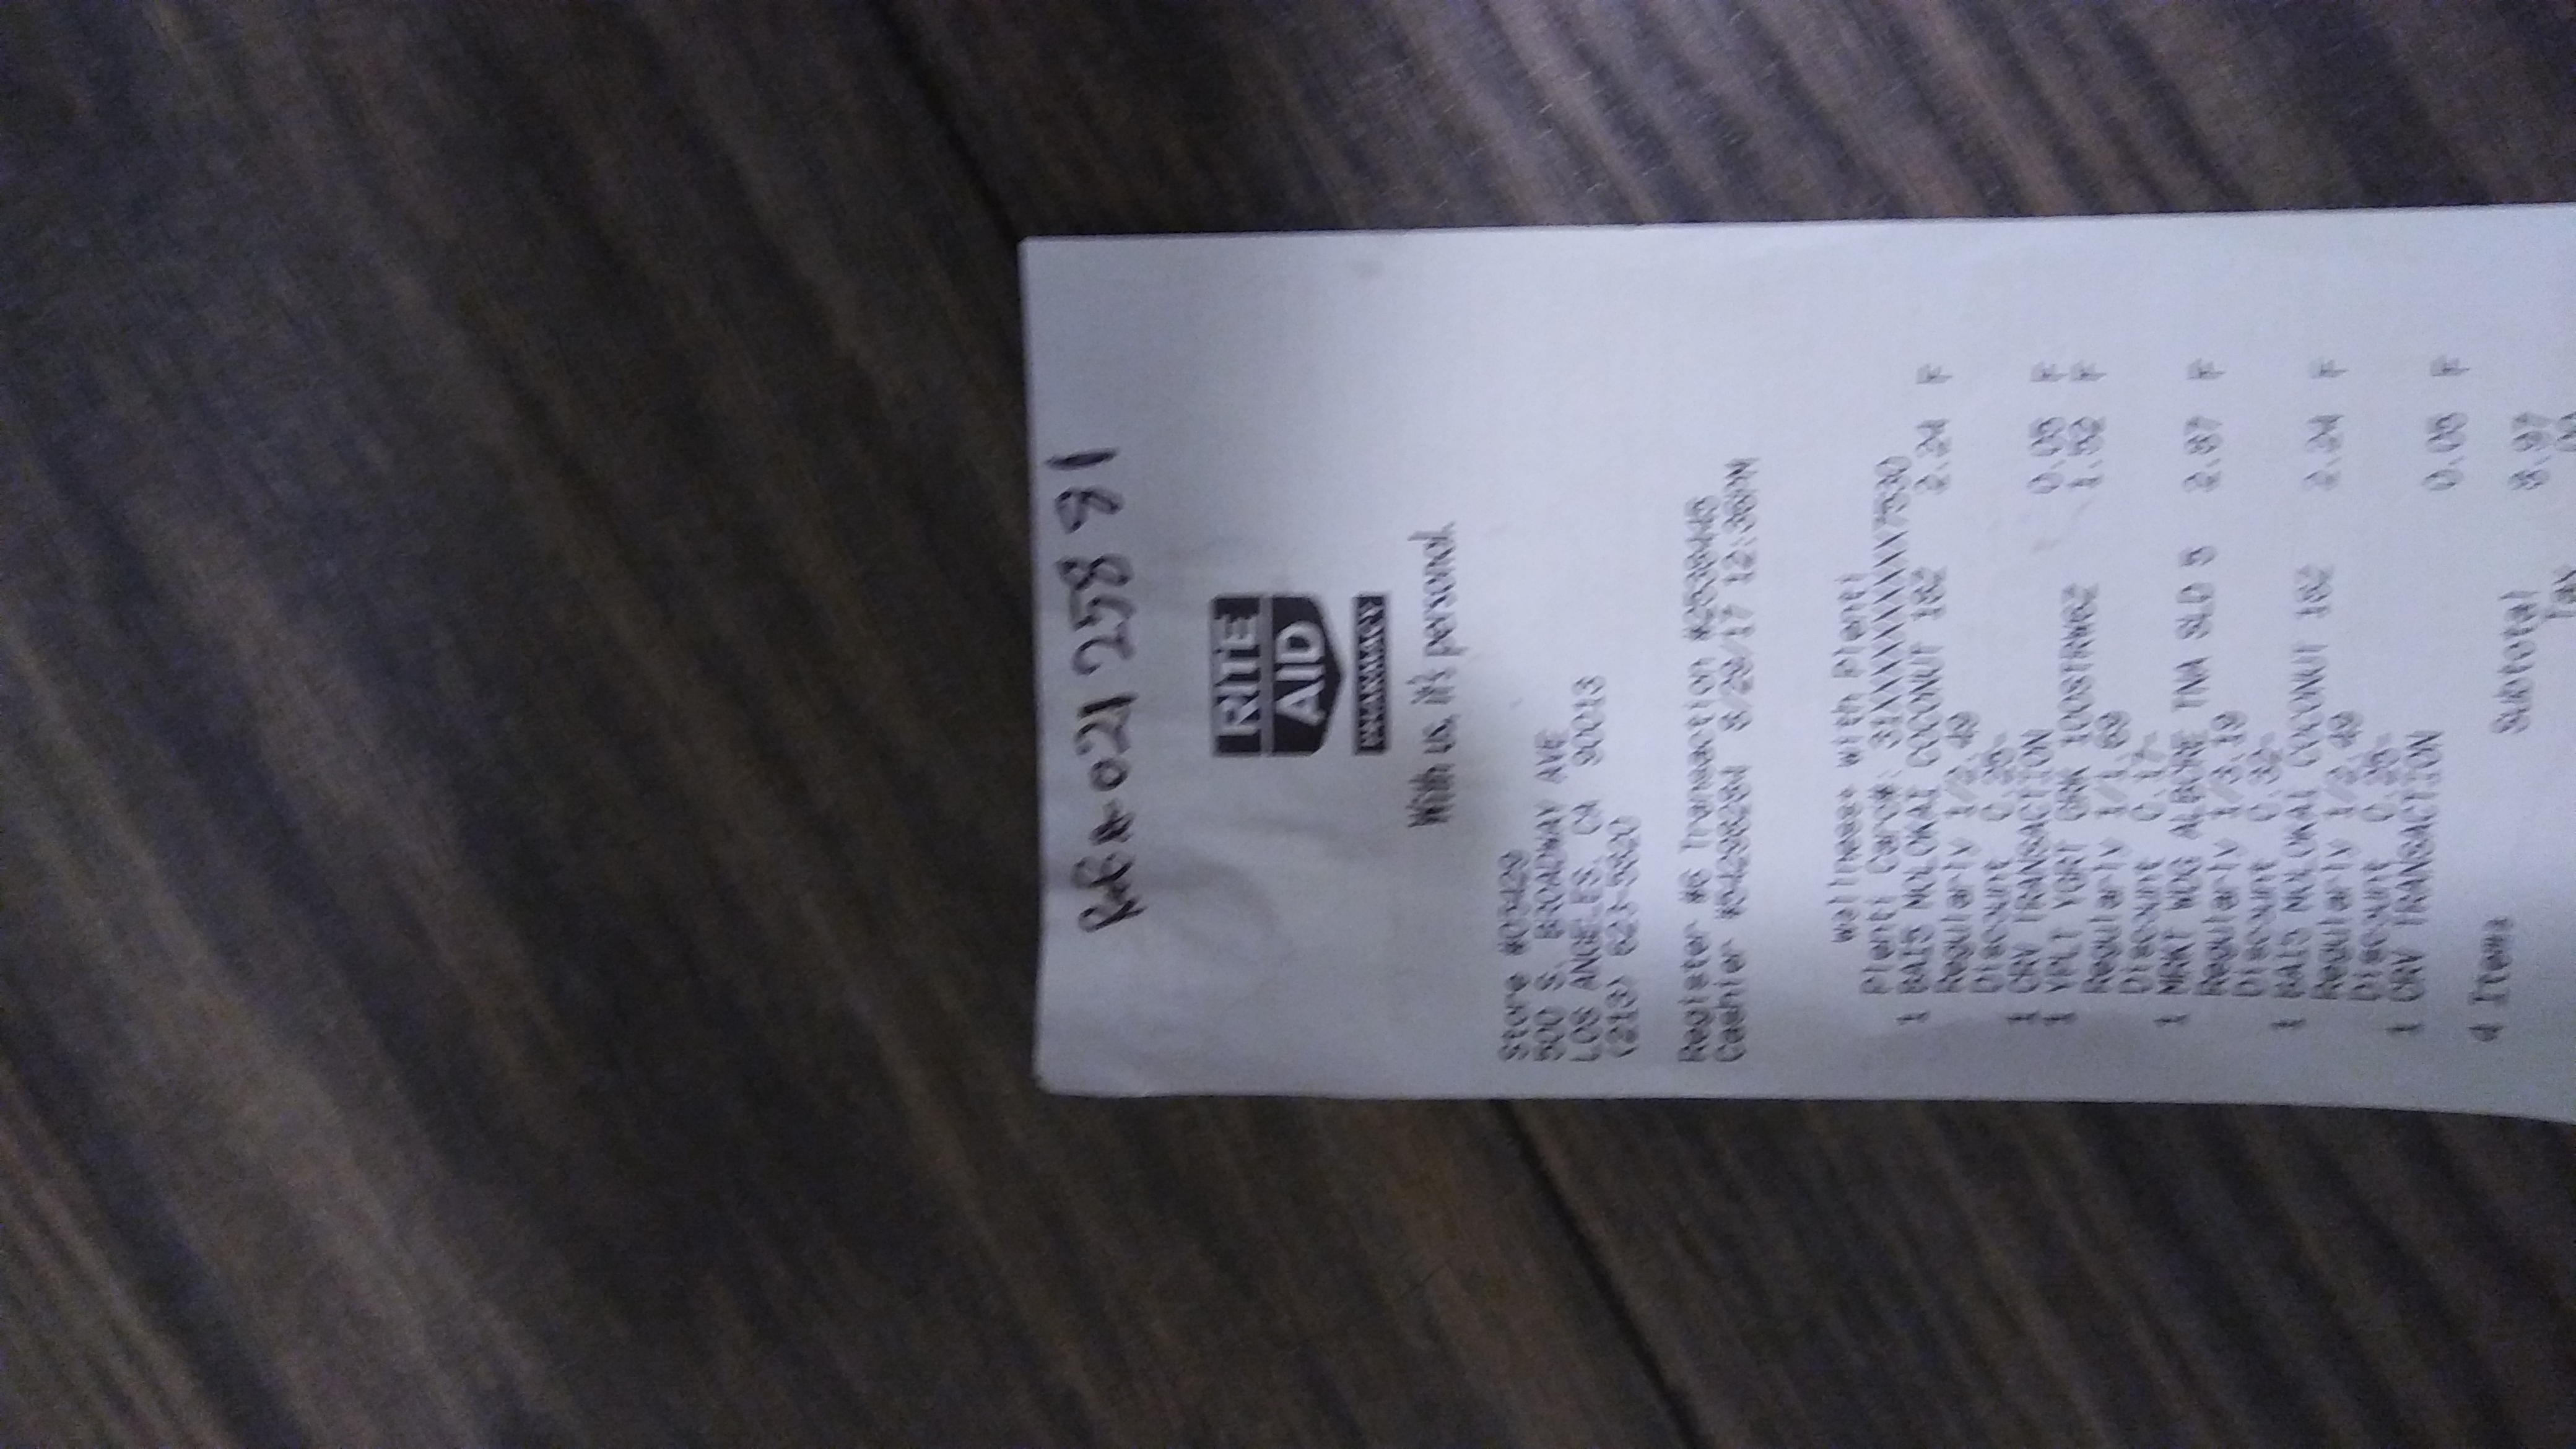 Copy Of My In-Store Receipt Showing Proof Of Purchase!